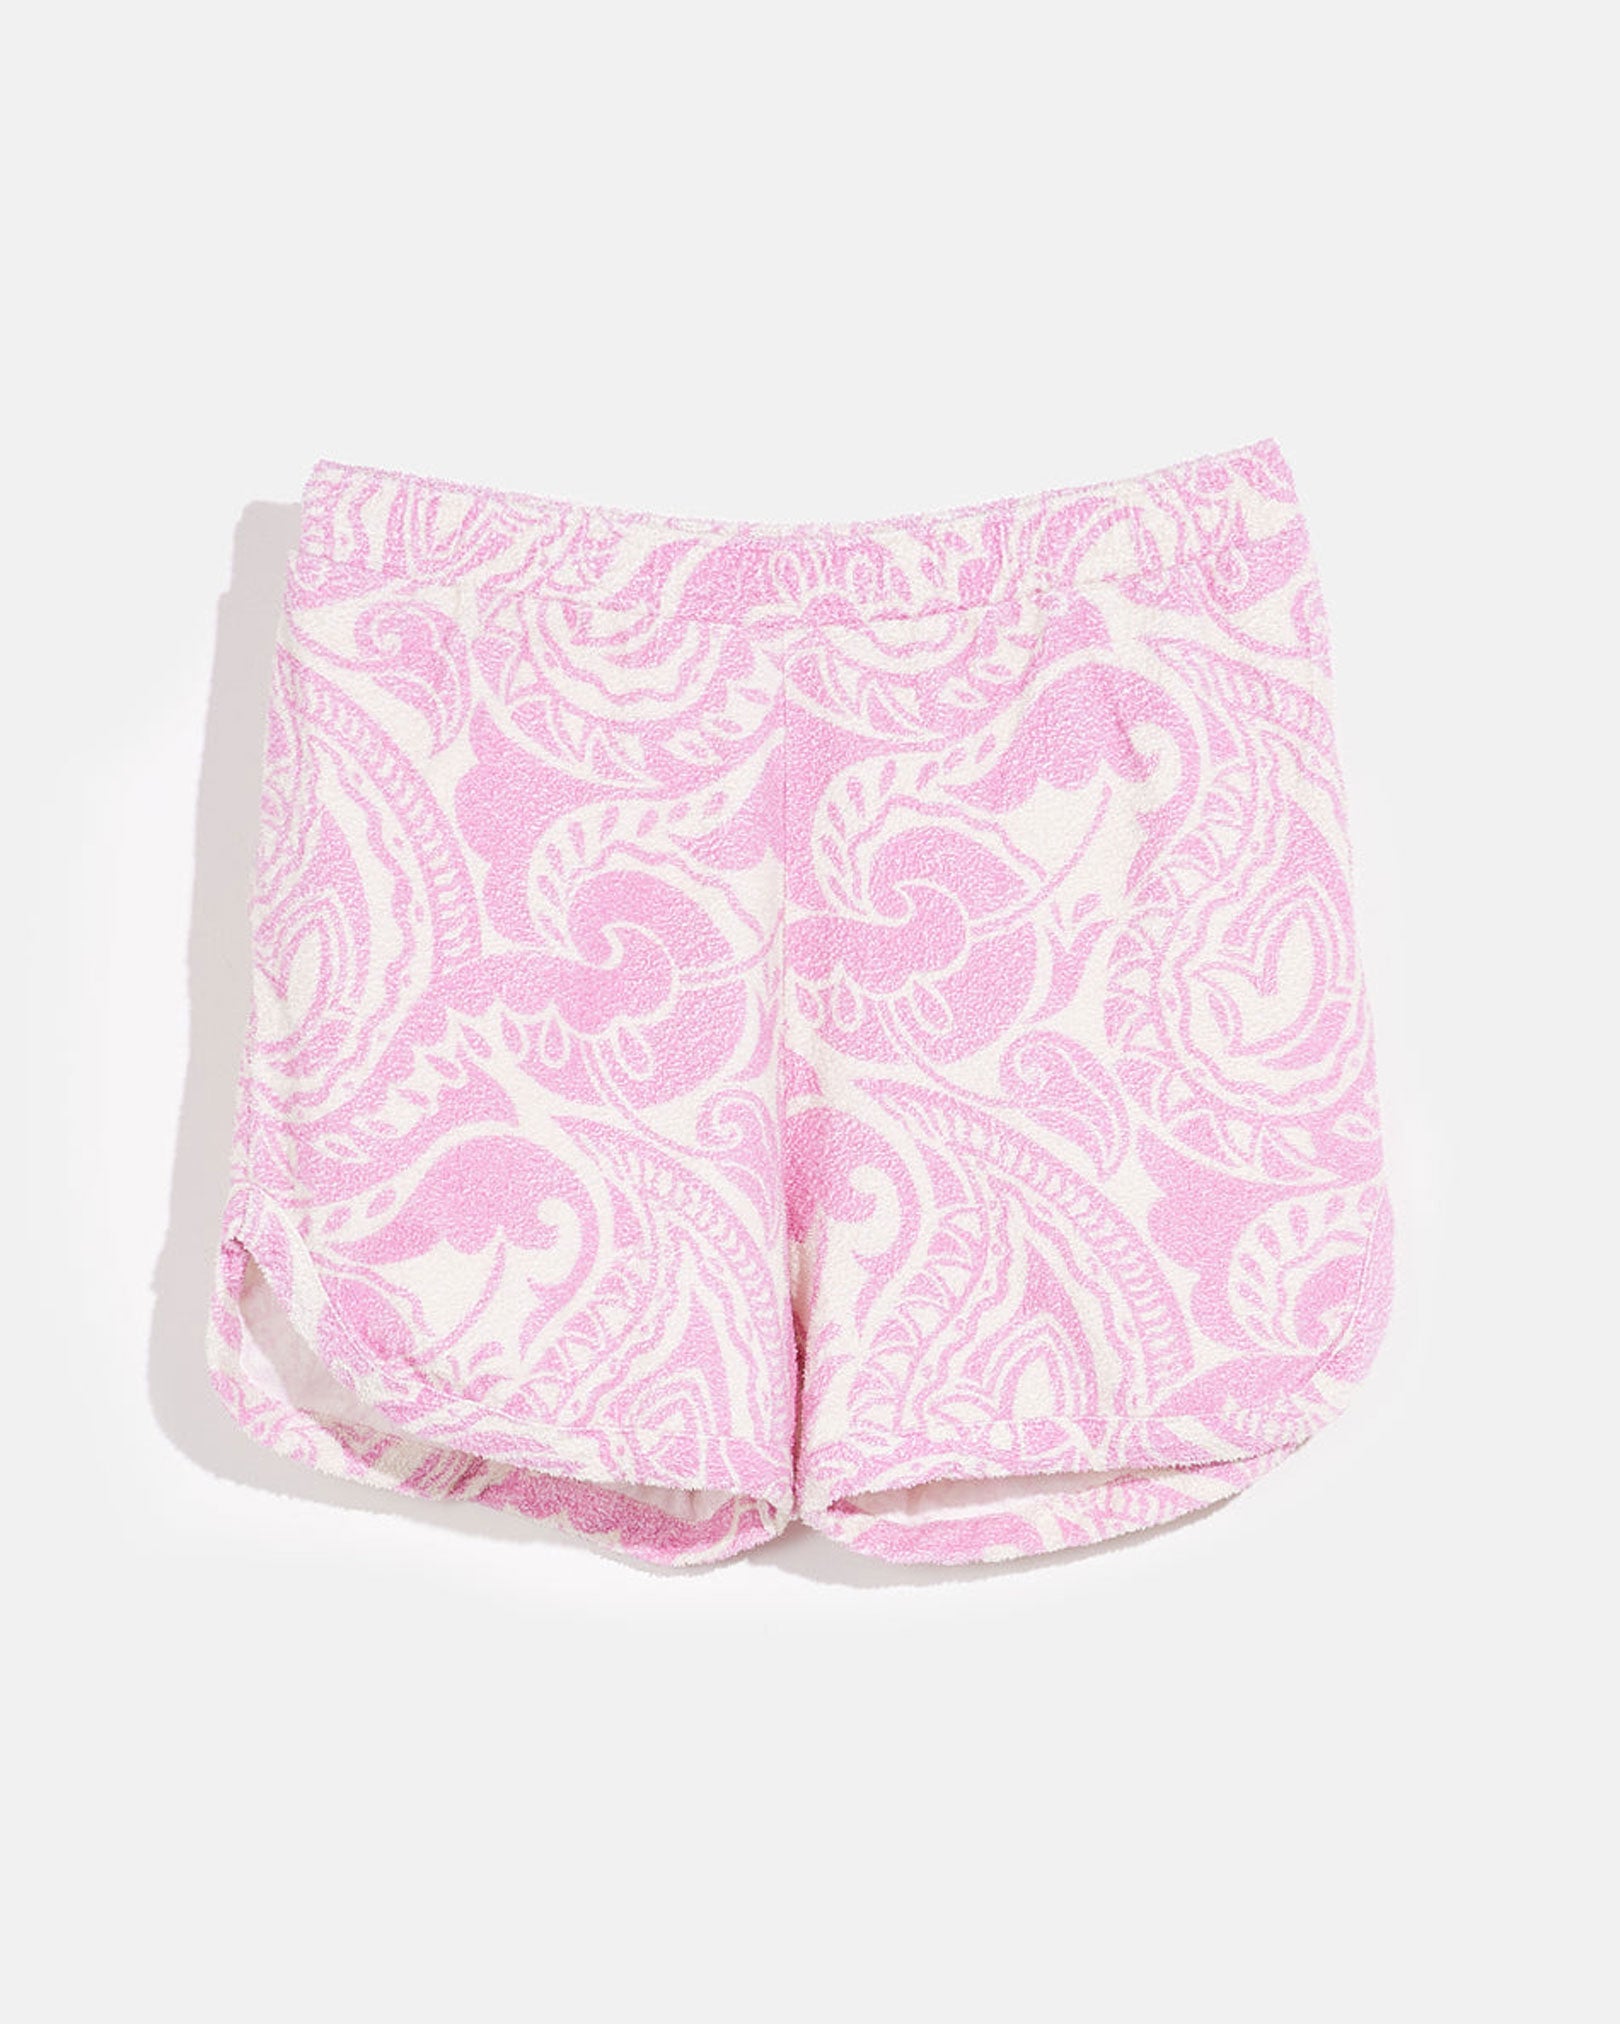 BELLEROSE Migui Shorts in Pink Paisley available at Lahn.shop